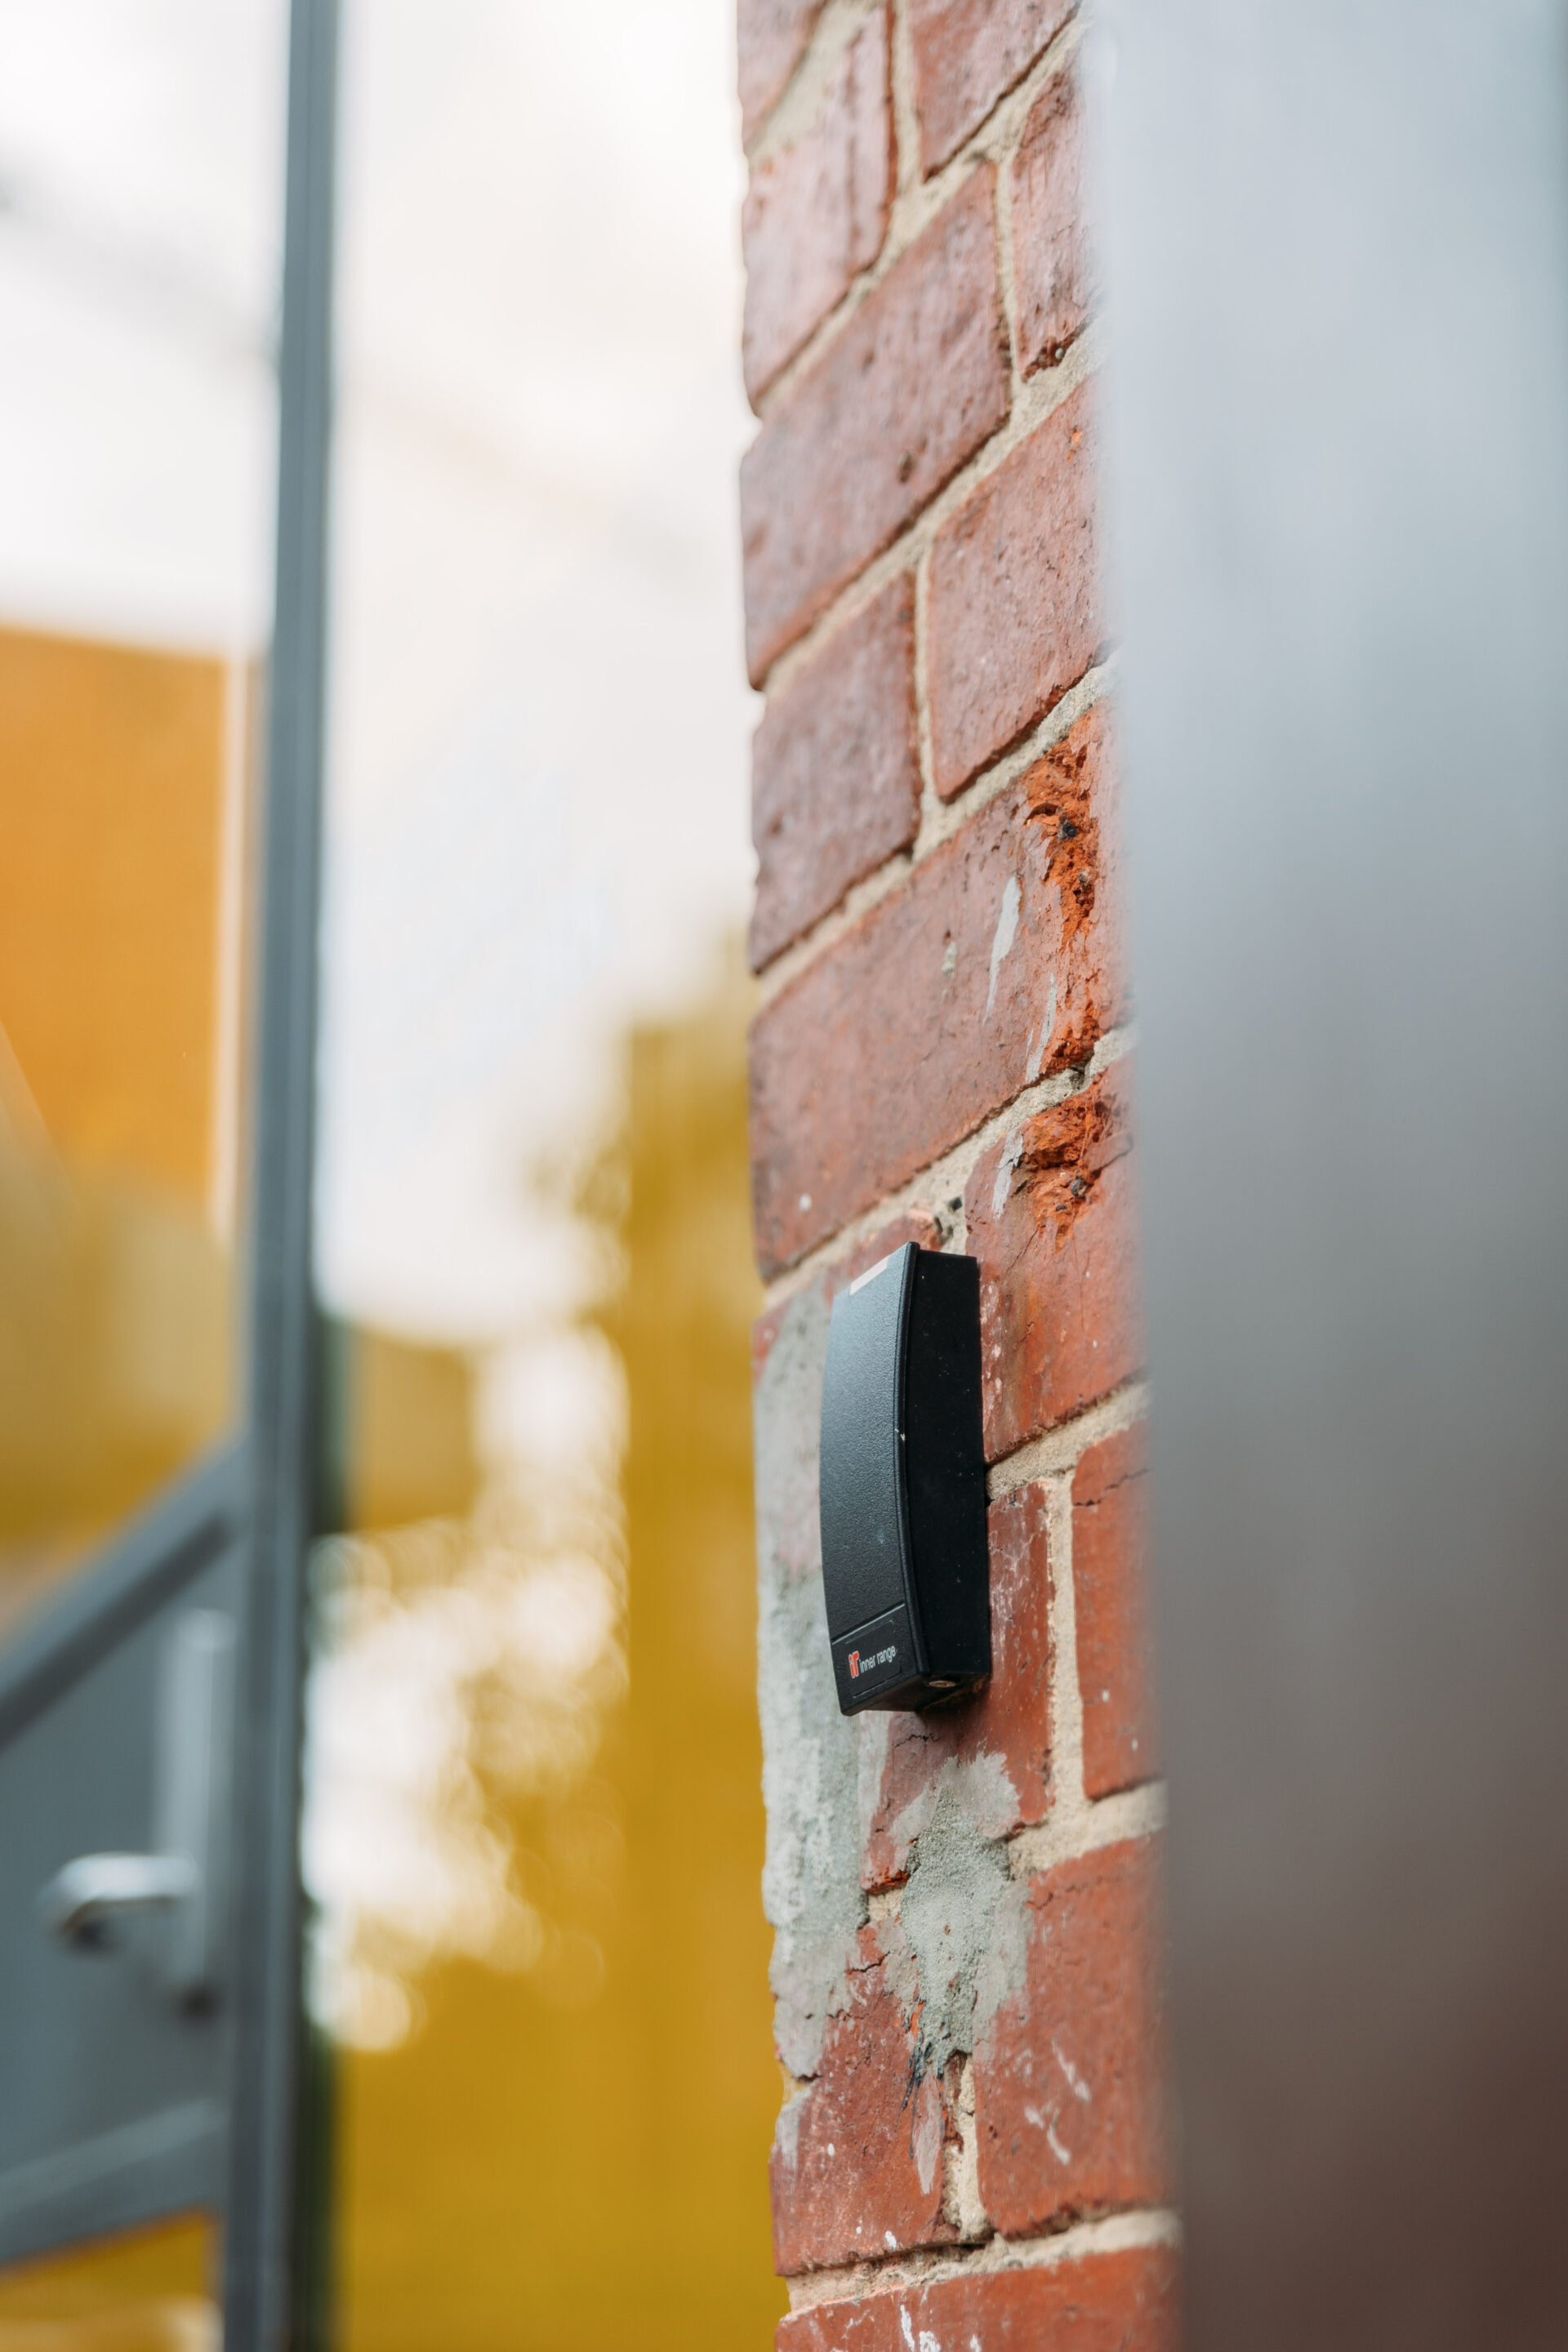 Photo of Music Market security entry. To the left is a blurred glass door and door handle. In the foreground is a security swipe pass on a brick wall.